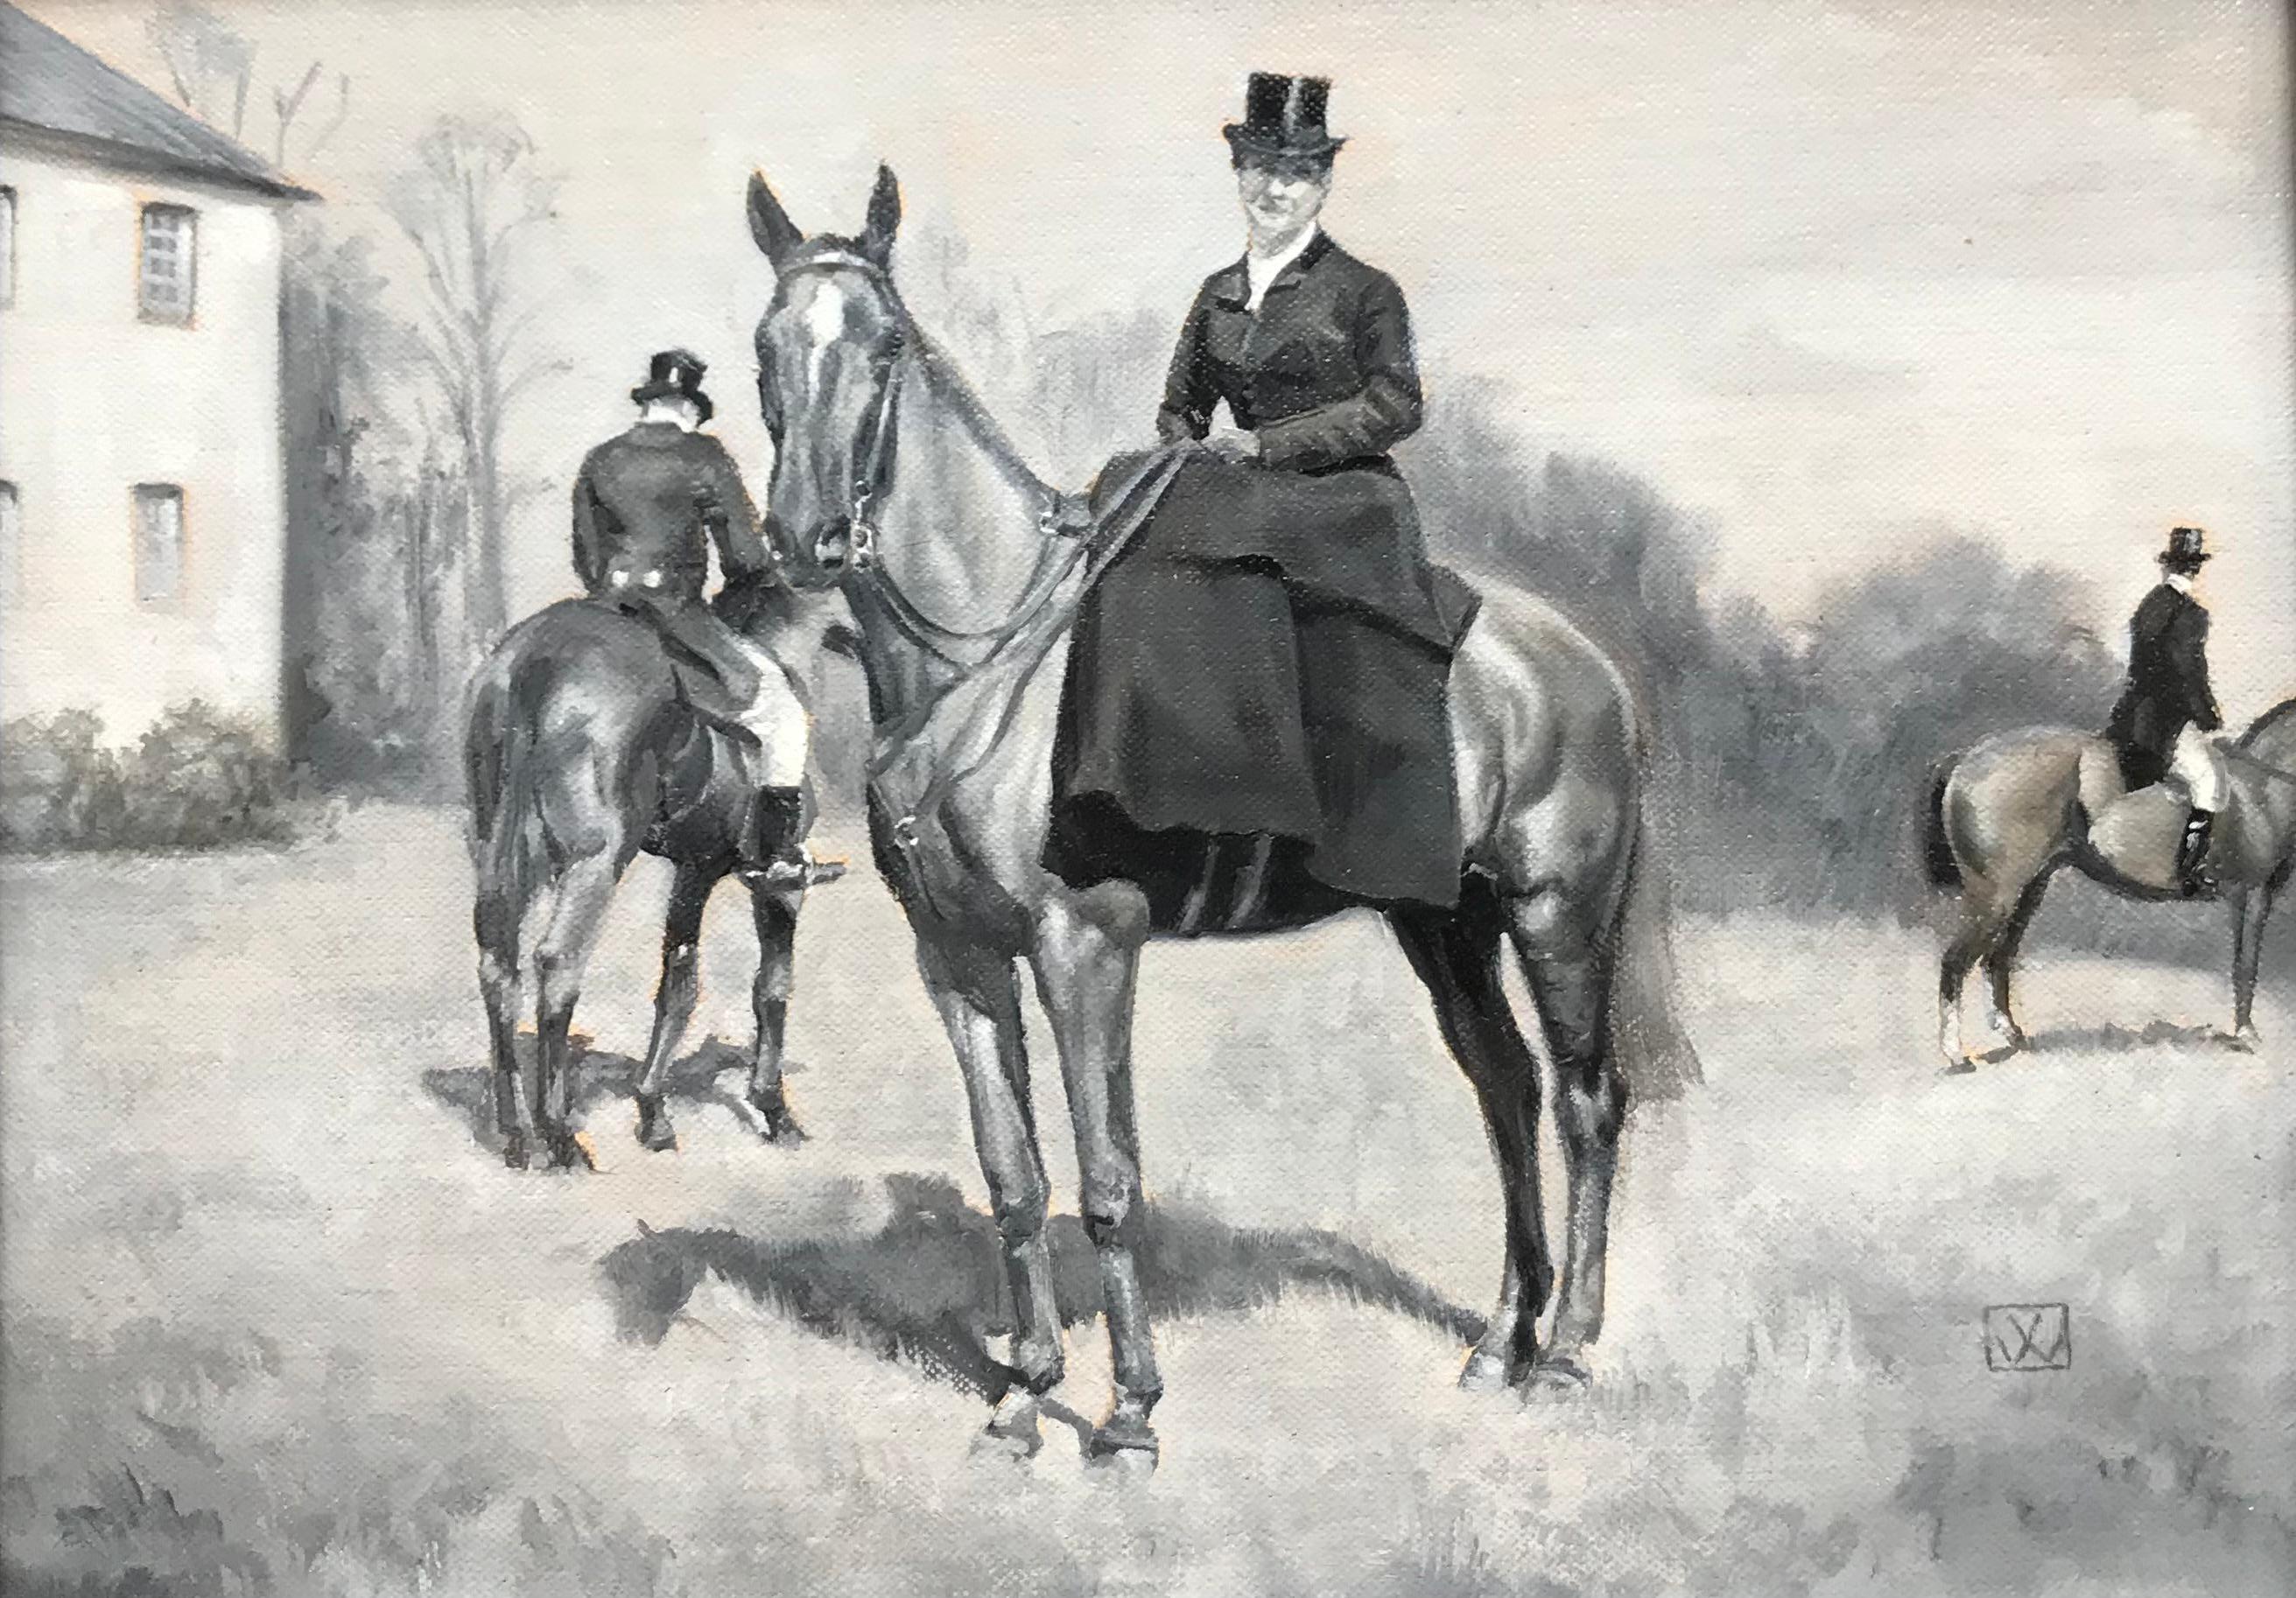 Valarie Wolf Figurative Painting - Monochrome Horse Painting of Riders with a Side Saddle Rider Evokes the Past